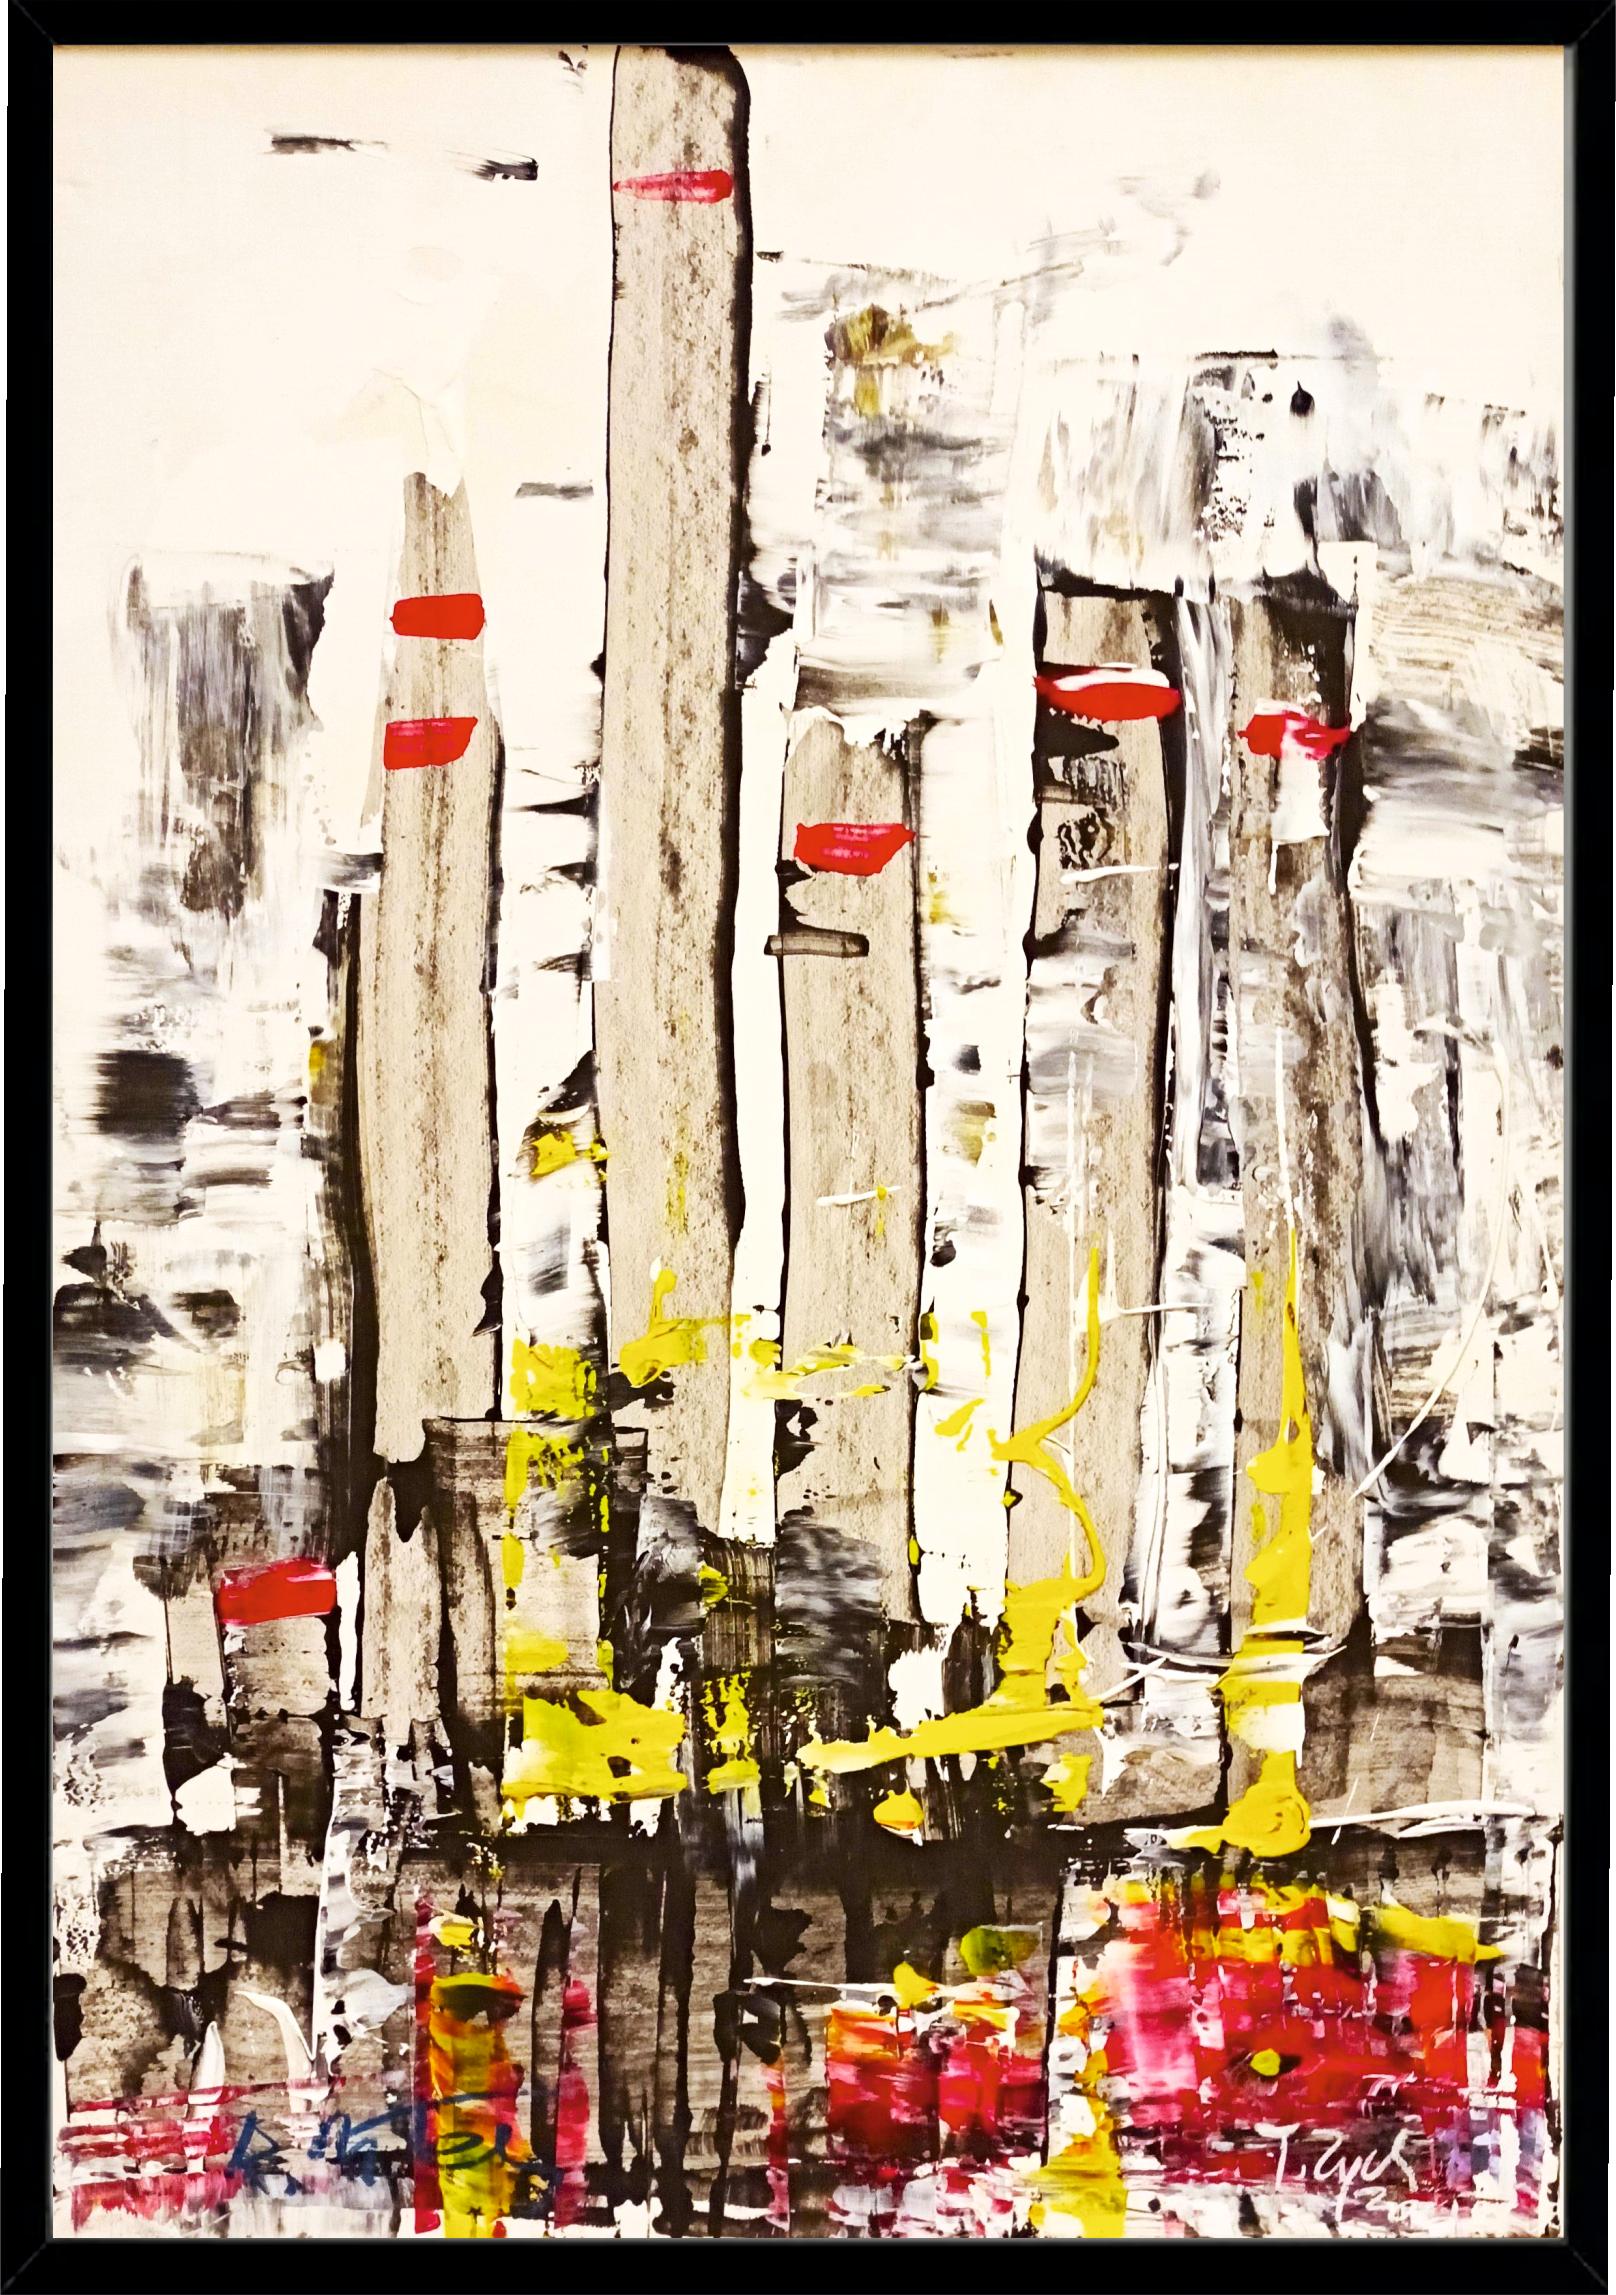 Tadeusz Zych Abstract Painting - "Ironworks" / Acrylic, oil on board / 100 x 70 cm 